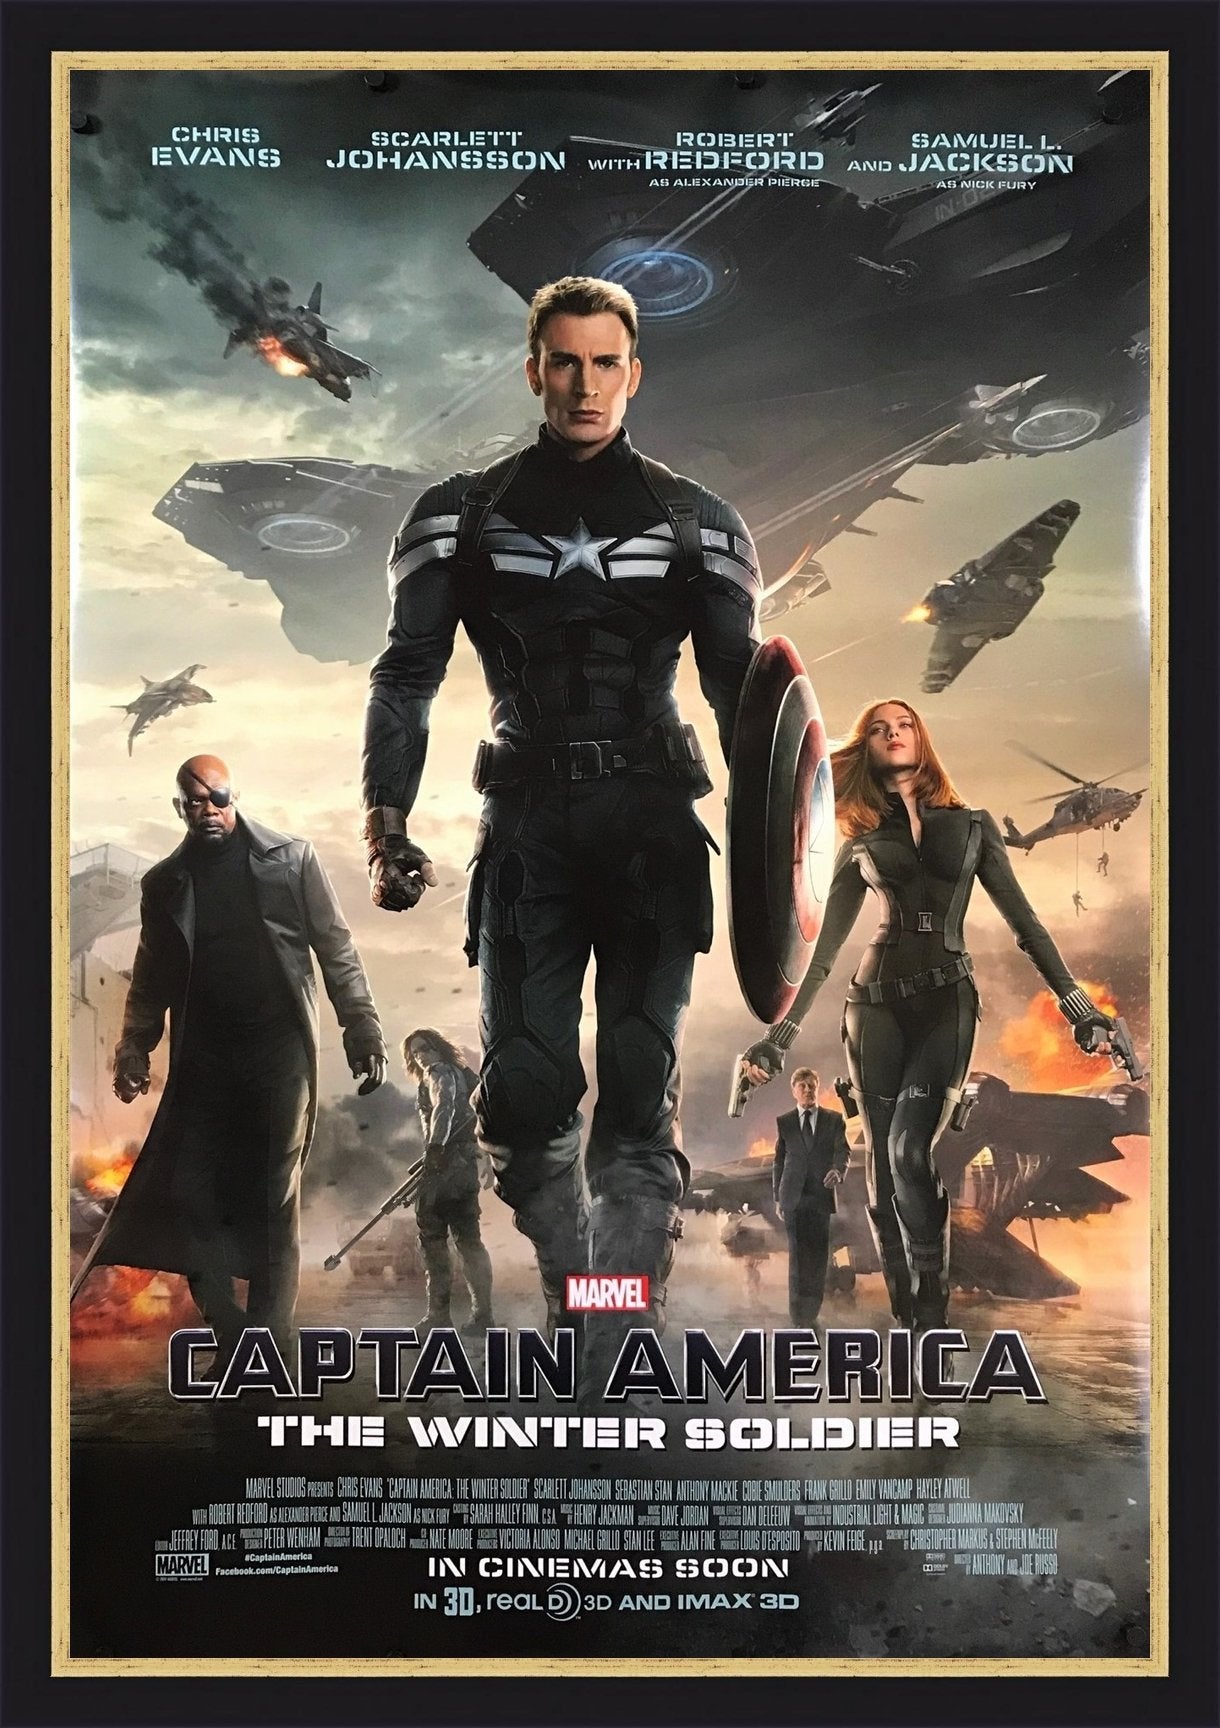 An original movie poster for the film Captain America The Winter's Soldier